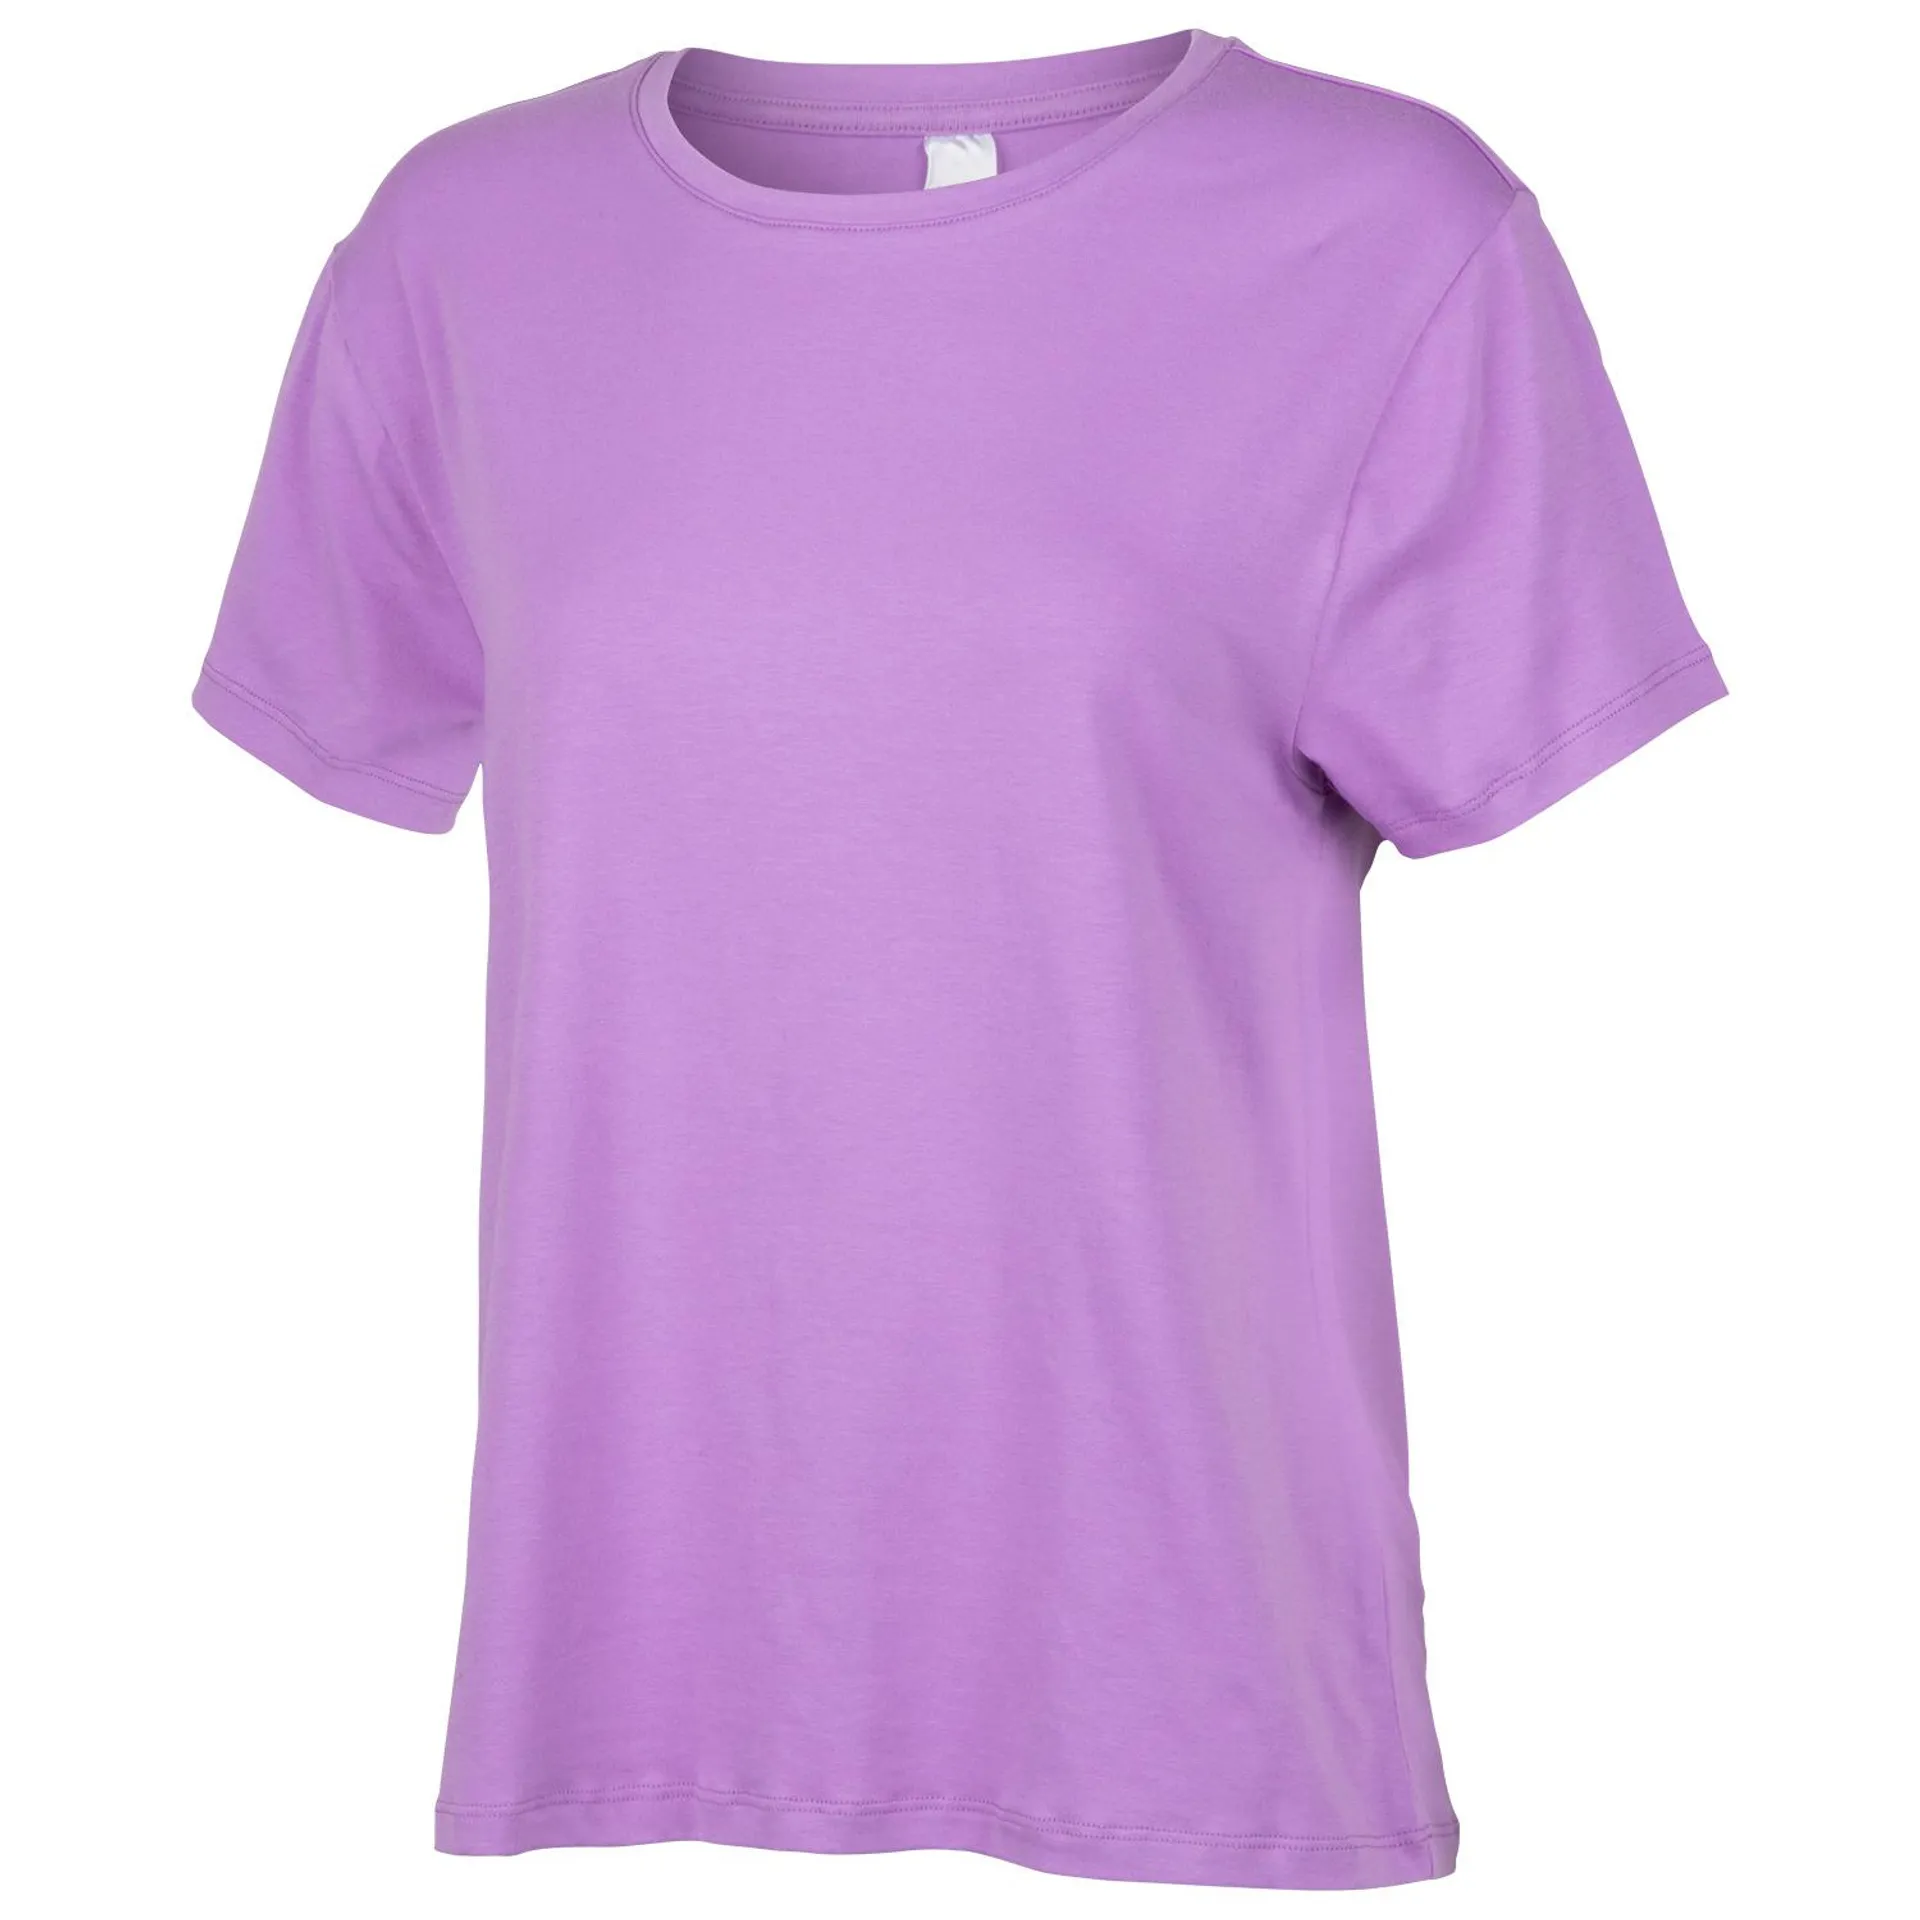 Activ8 Women's Recharge Boxy Fit Tee